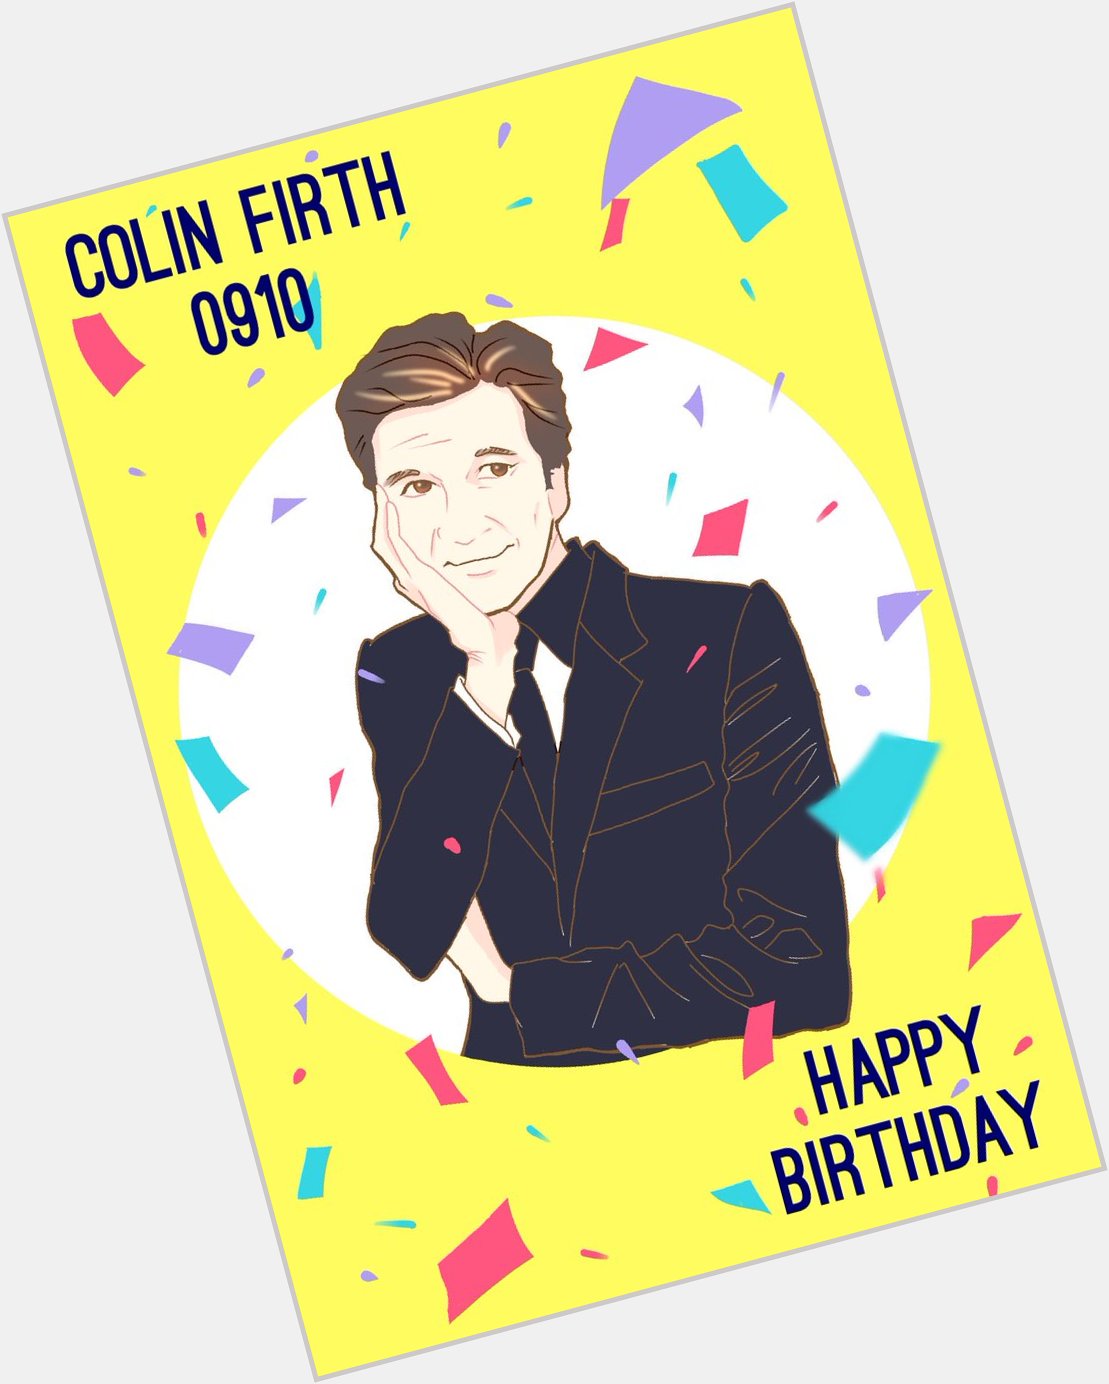 Happy birthday Colin Firth!!!!
So much love from Japan   